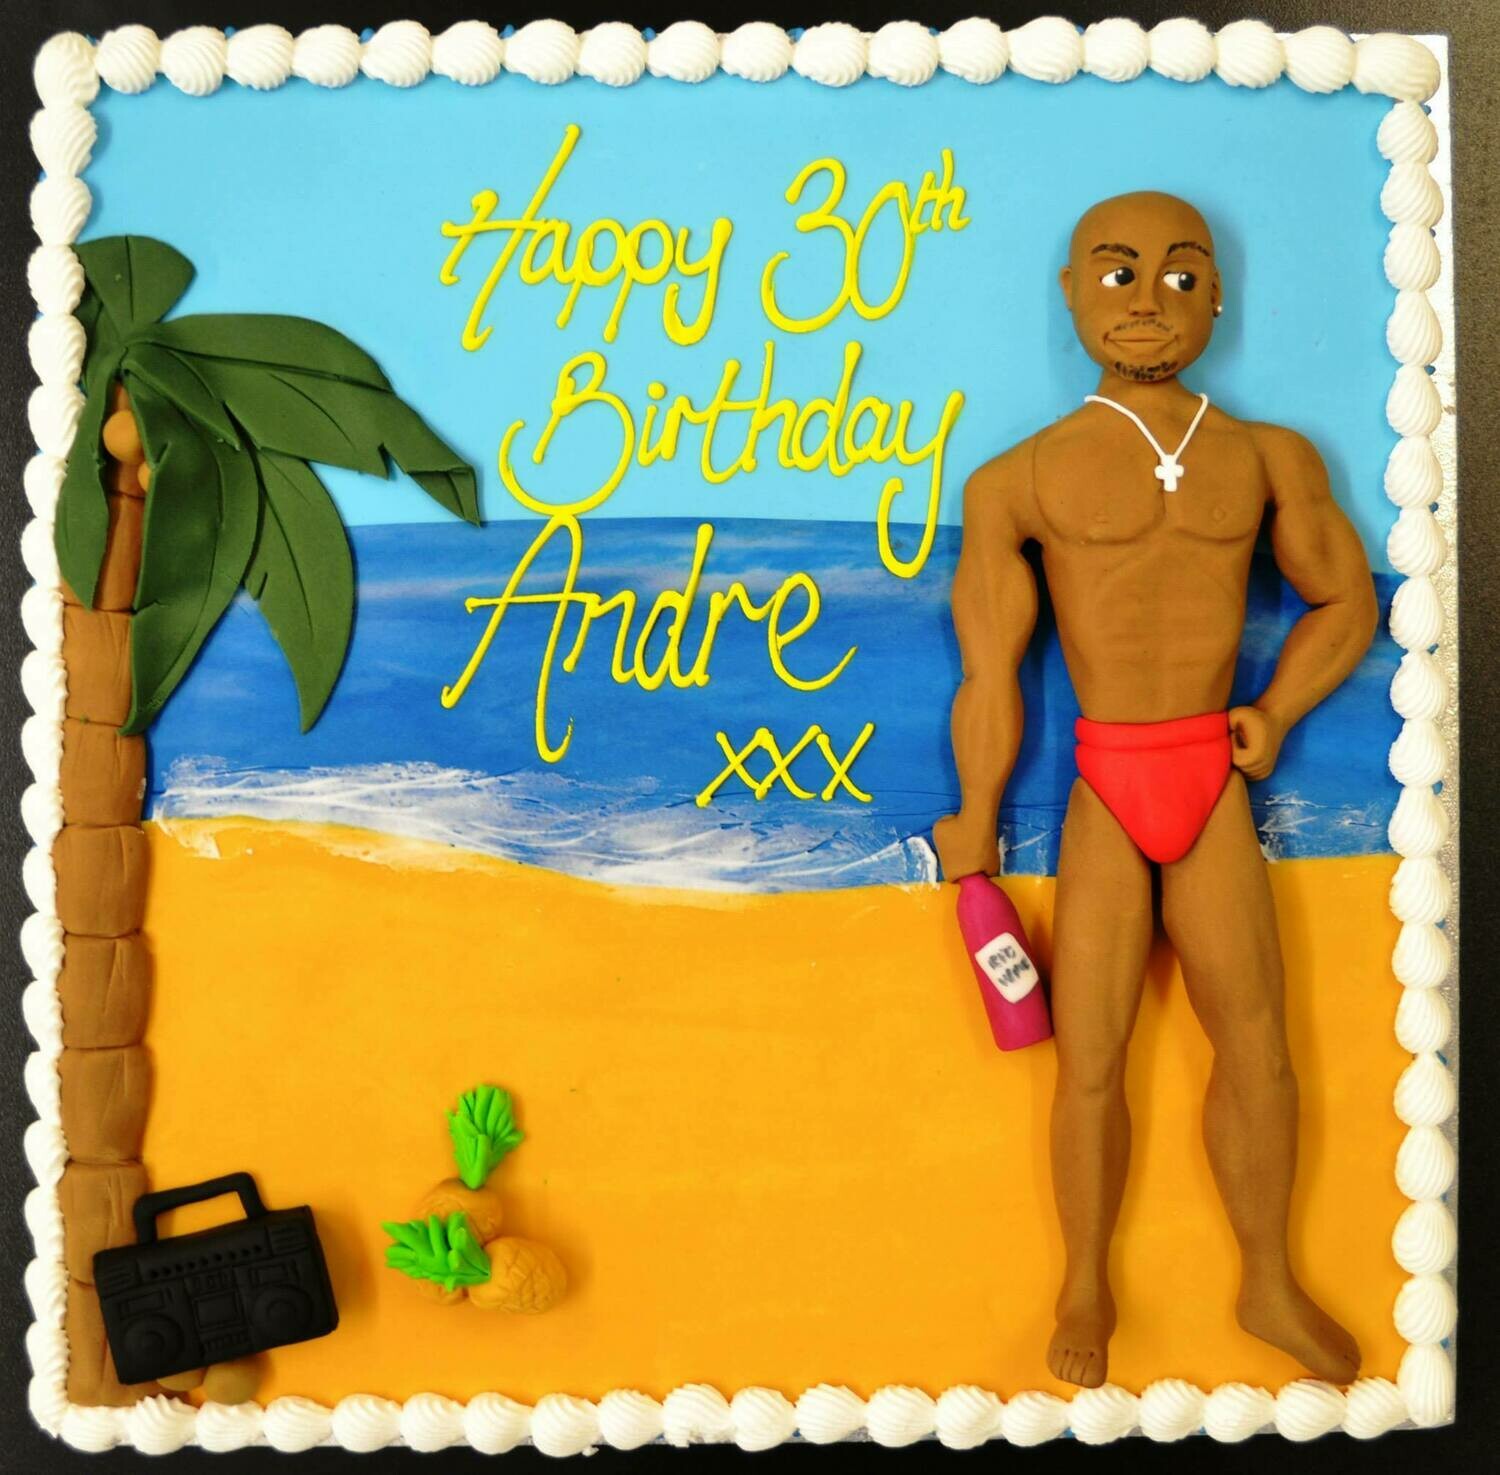 Square with beach theme and model